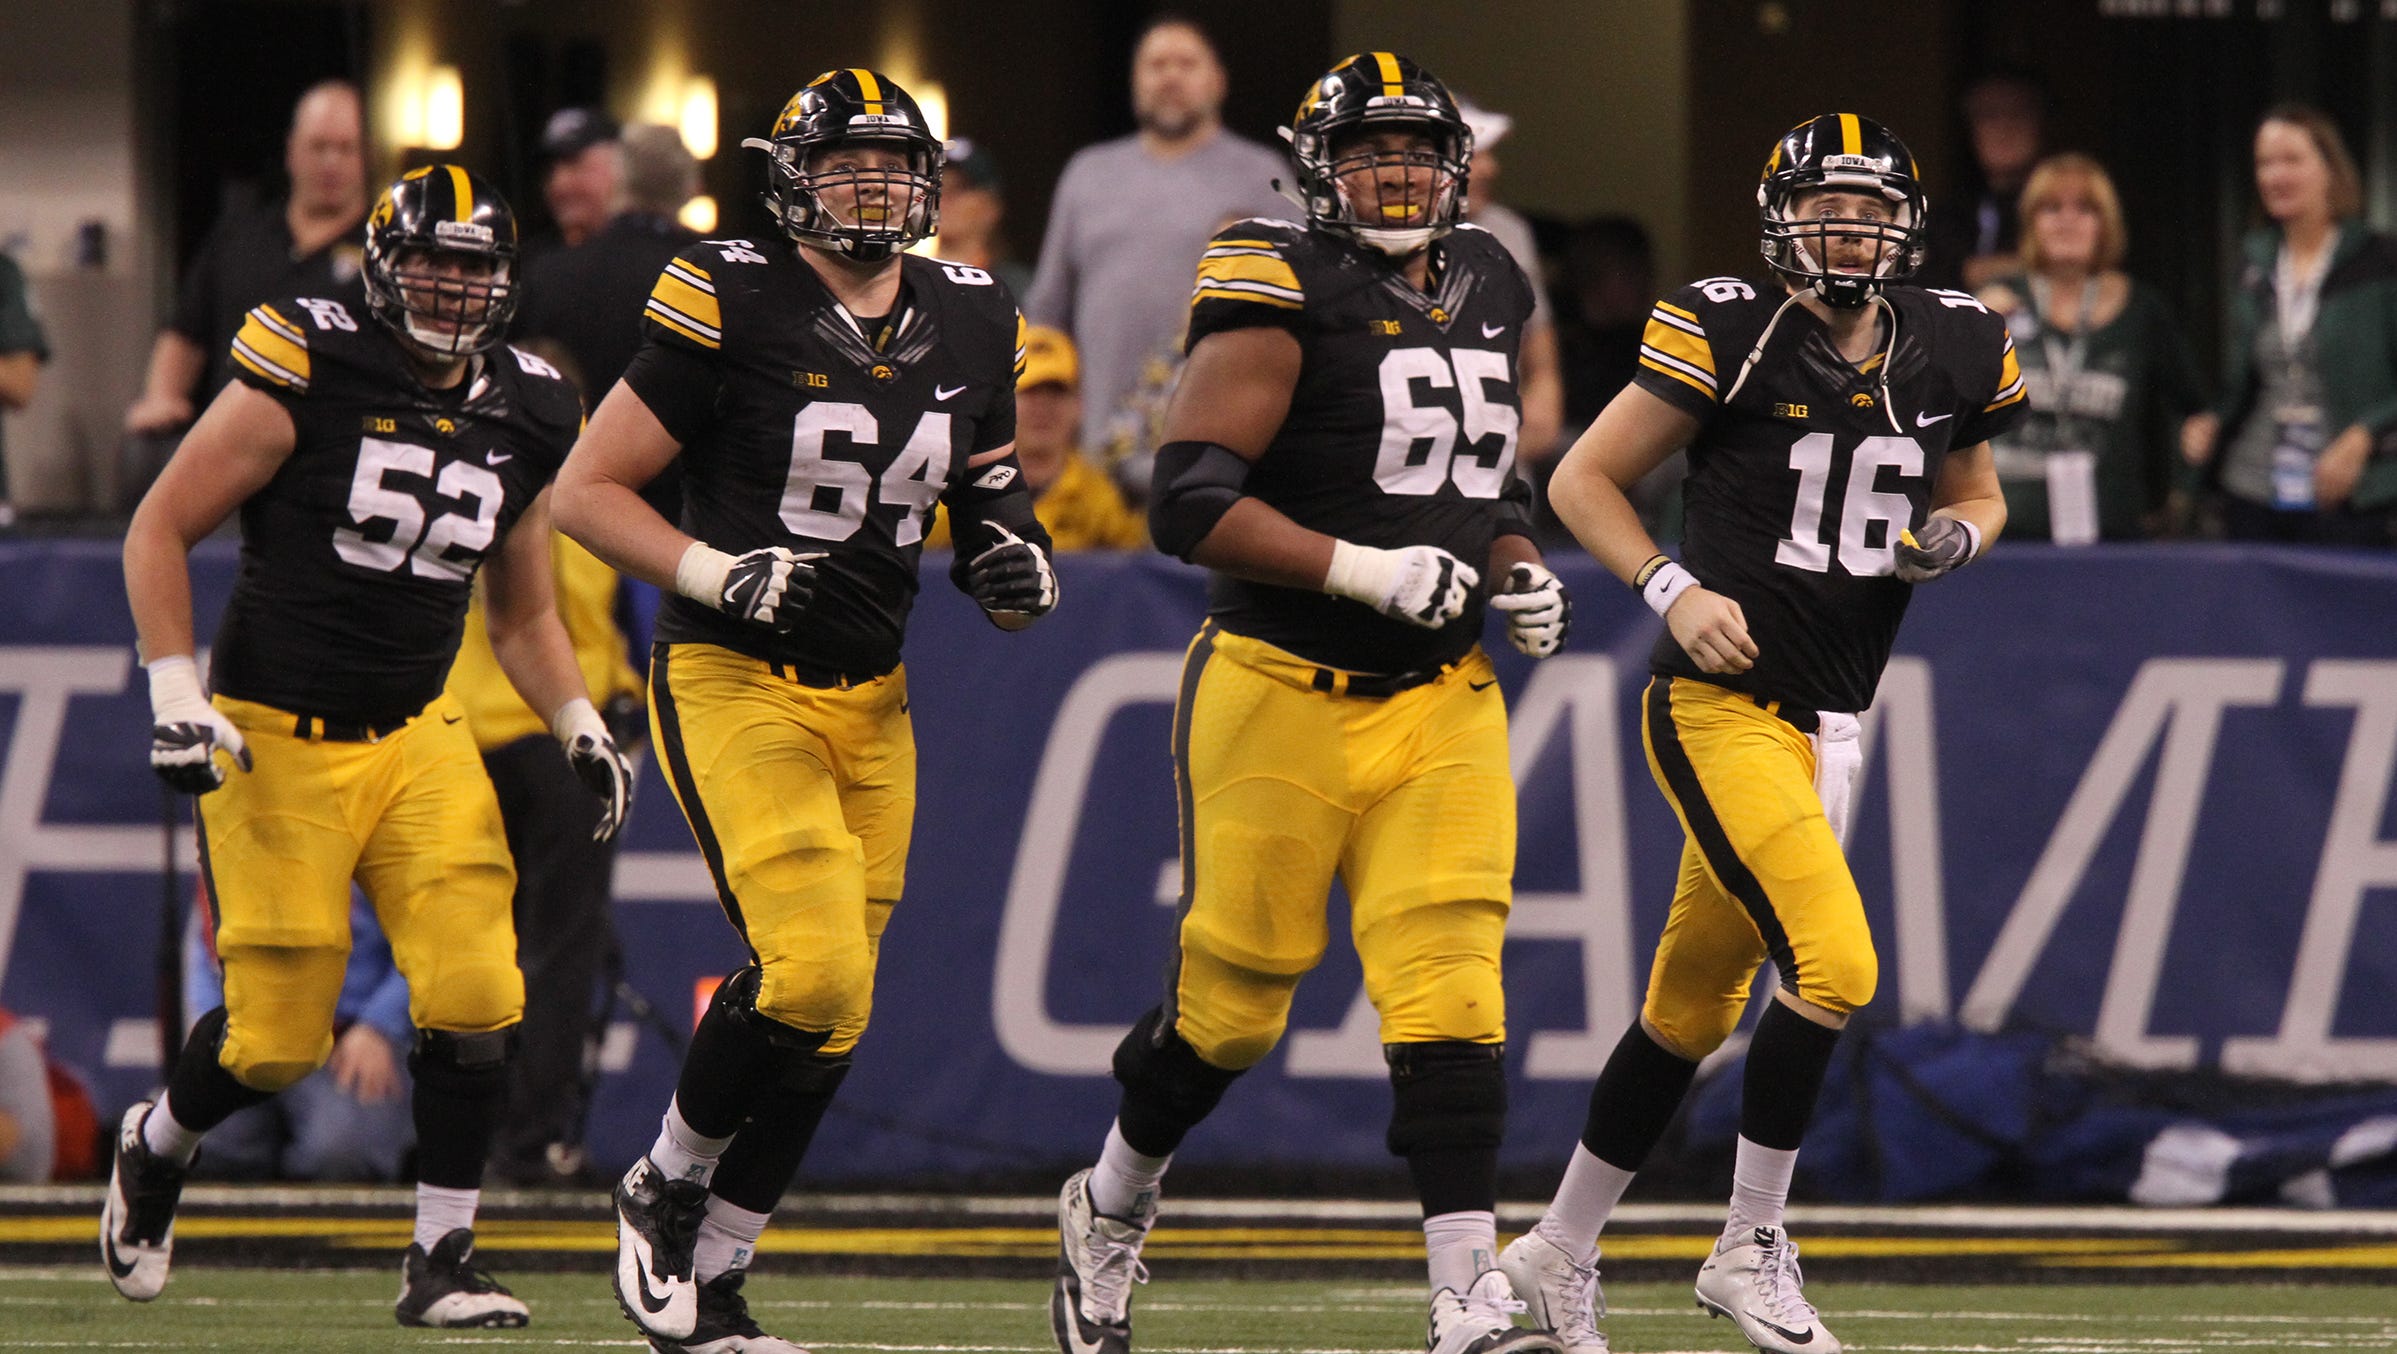 Iowa's offense heads to the bench during the Hawkeyes' Big Ten Championship game against Michigan State at Lucas Oil Stadium in Indianapolis, Ind. on Saturday, Dec. 5, 2015.